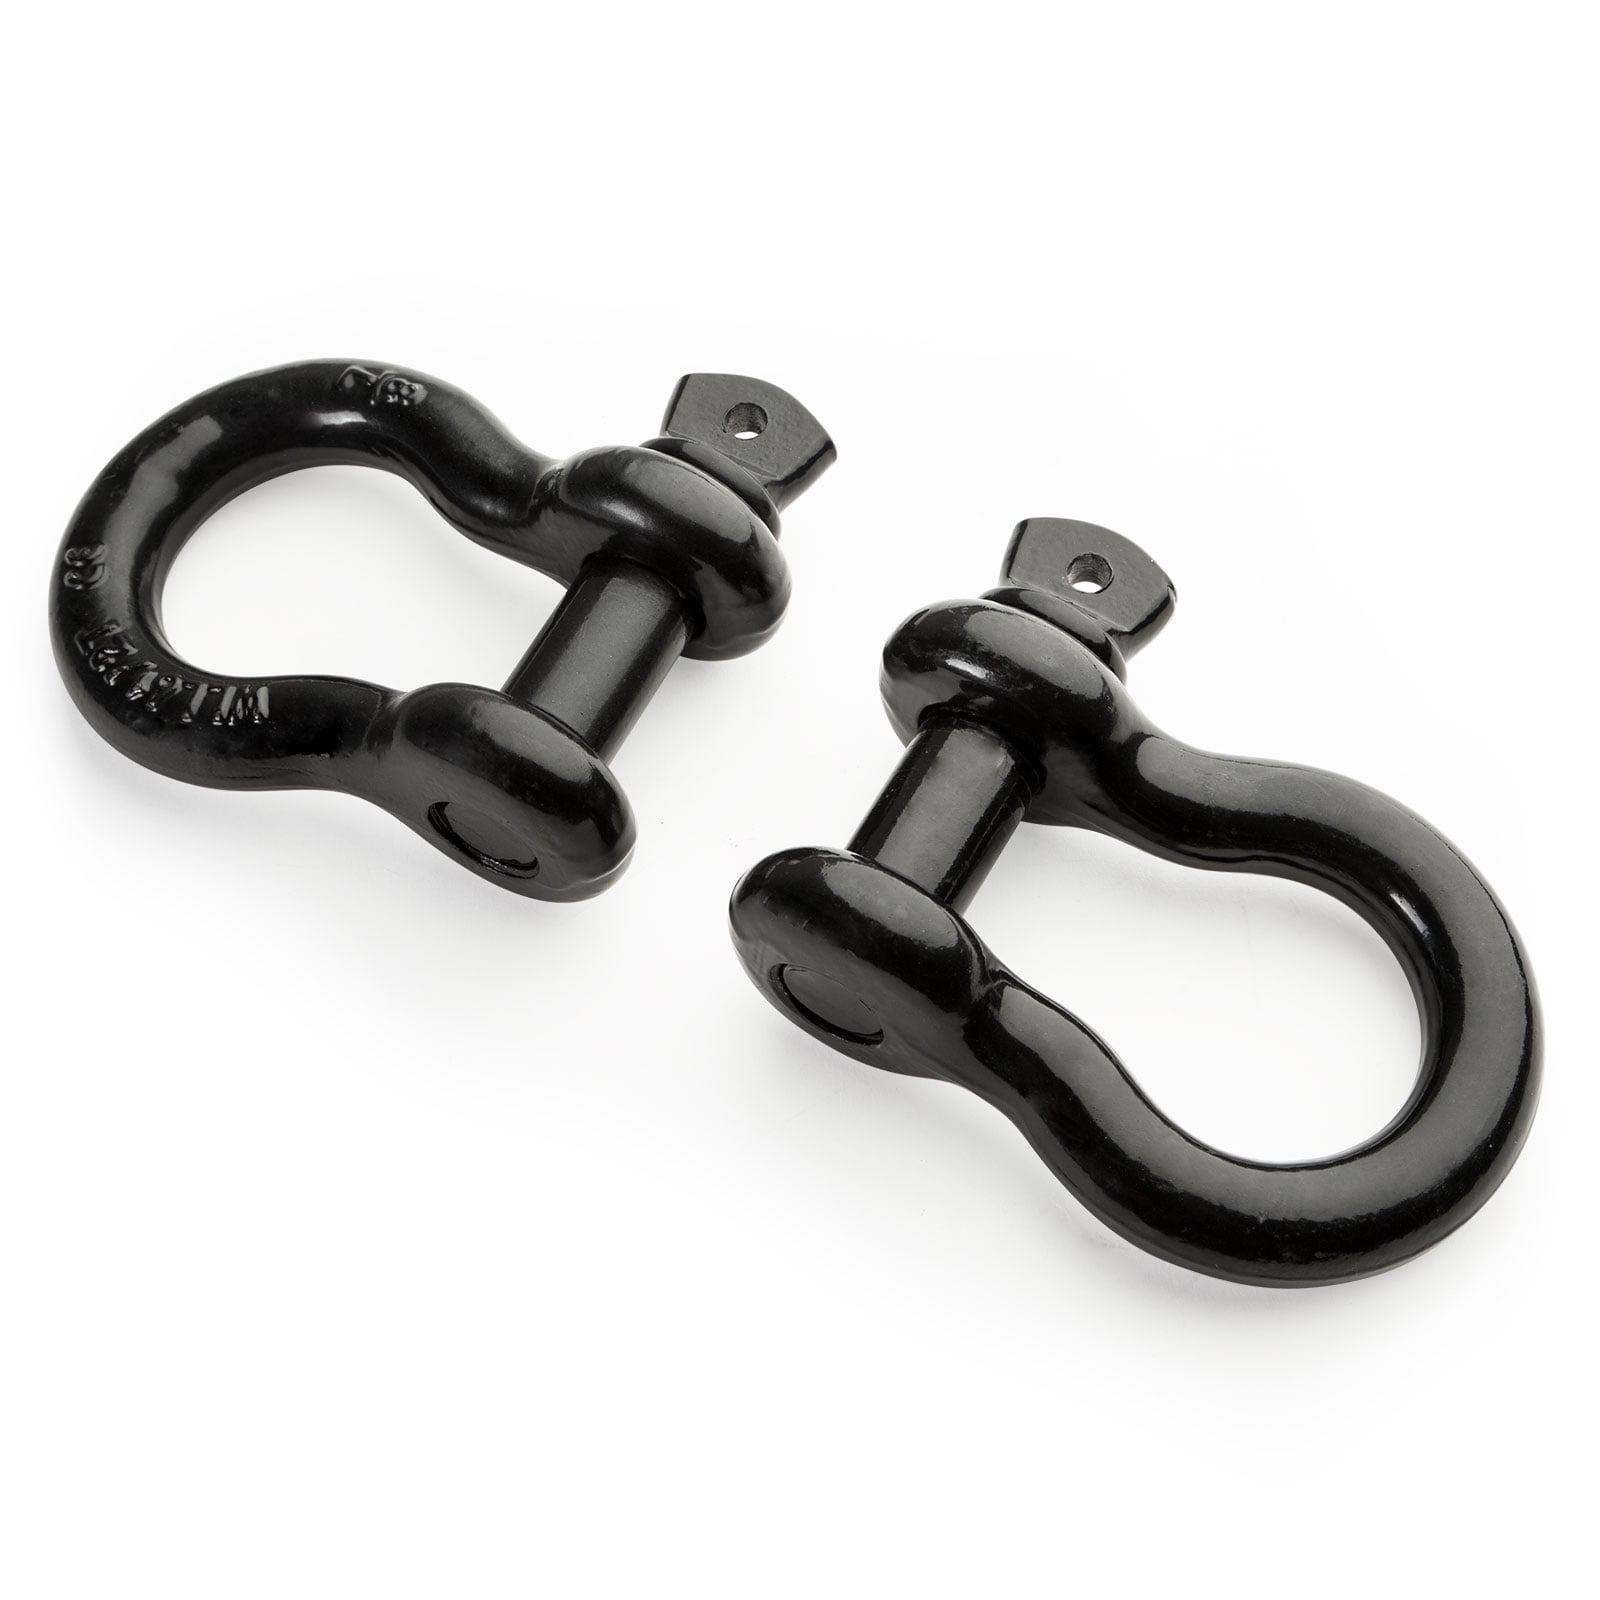 1/2 M12 304 Stainless Steel D Ring Shackle Lock for Heavy Duty Construction,Vehicle Recovery Hauling 2PCS